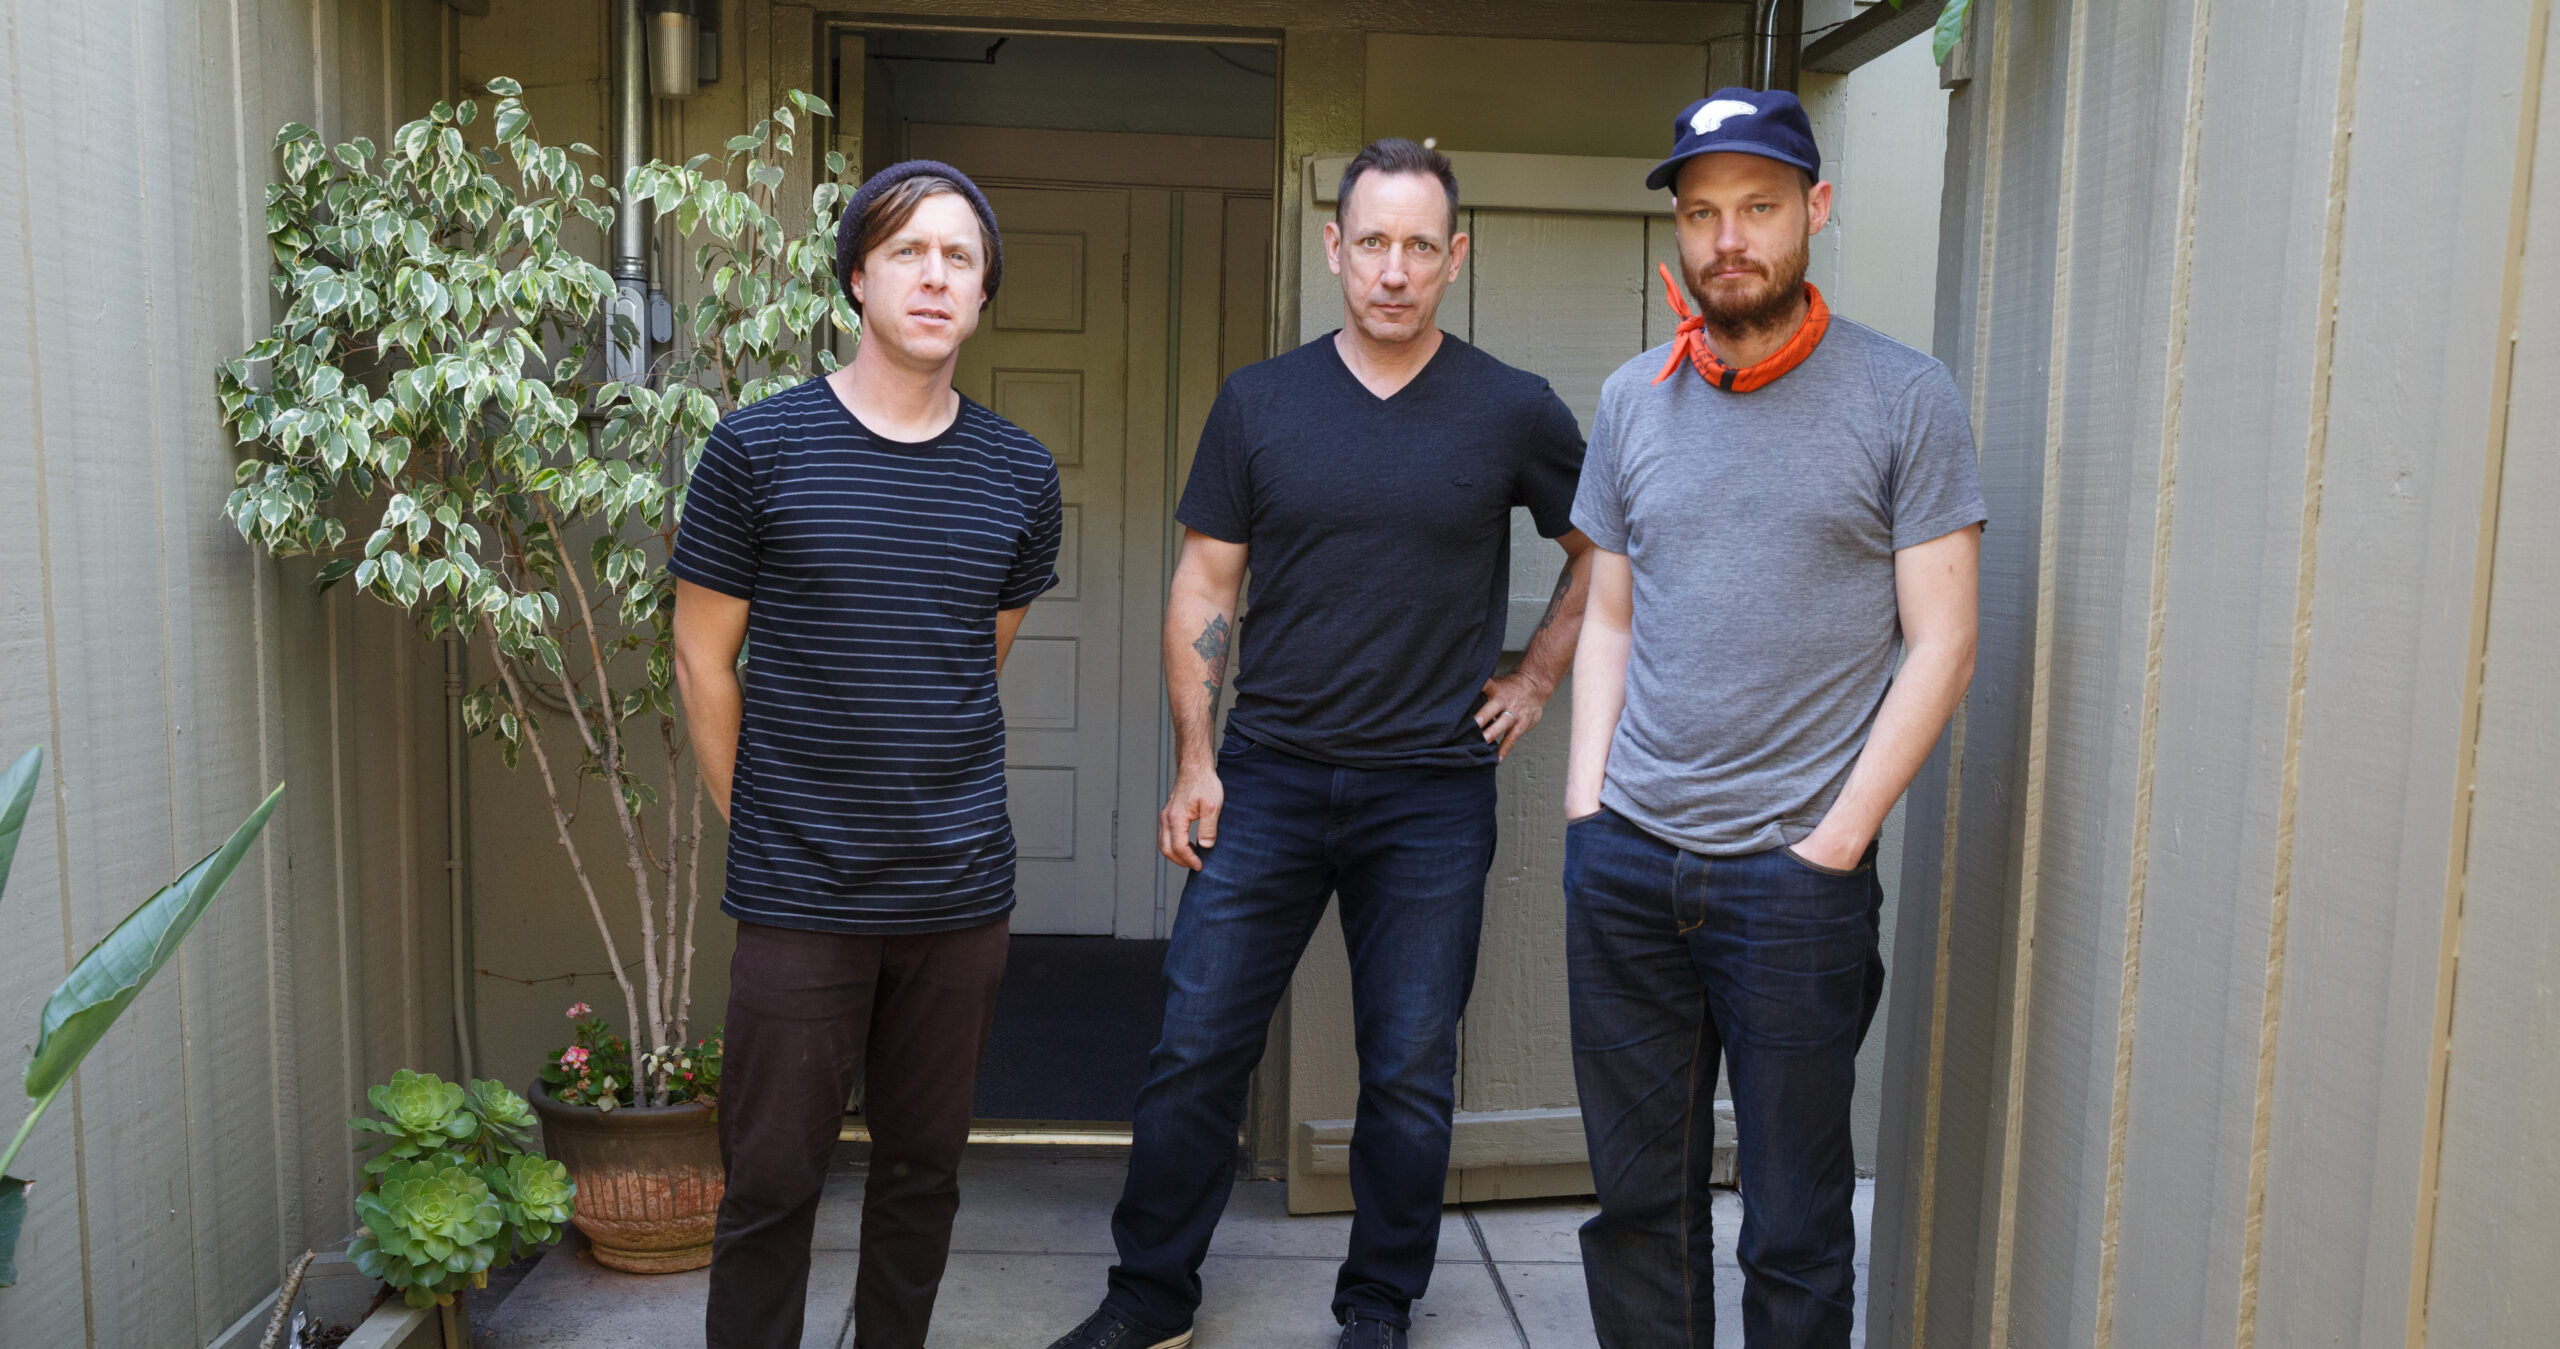 INTERVIEW: JIMMY CHAMBERLIN on his New Complex Album, Drumming and SMASHING PUMPKINS 3